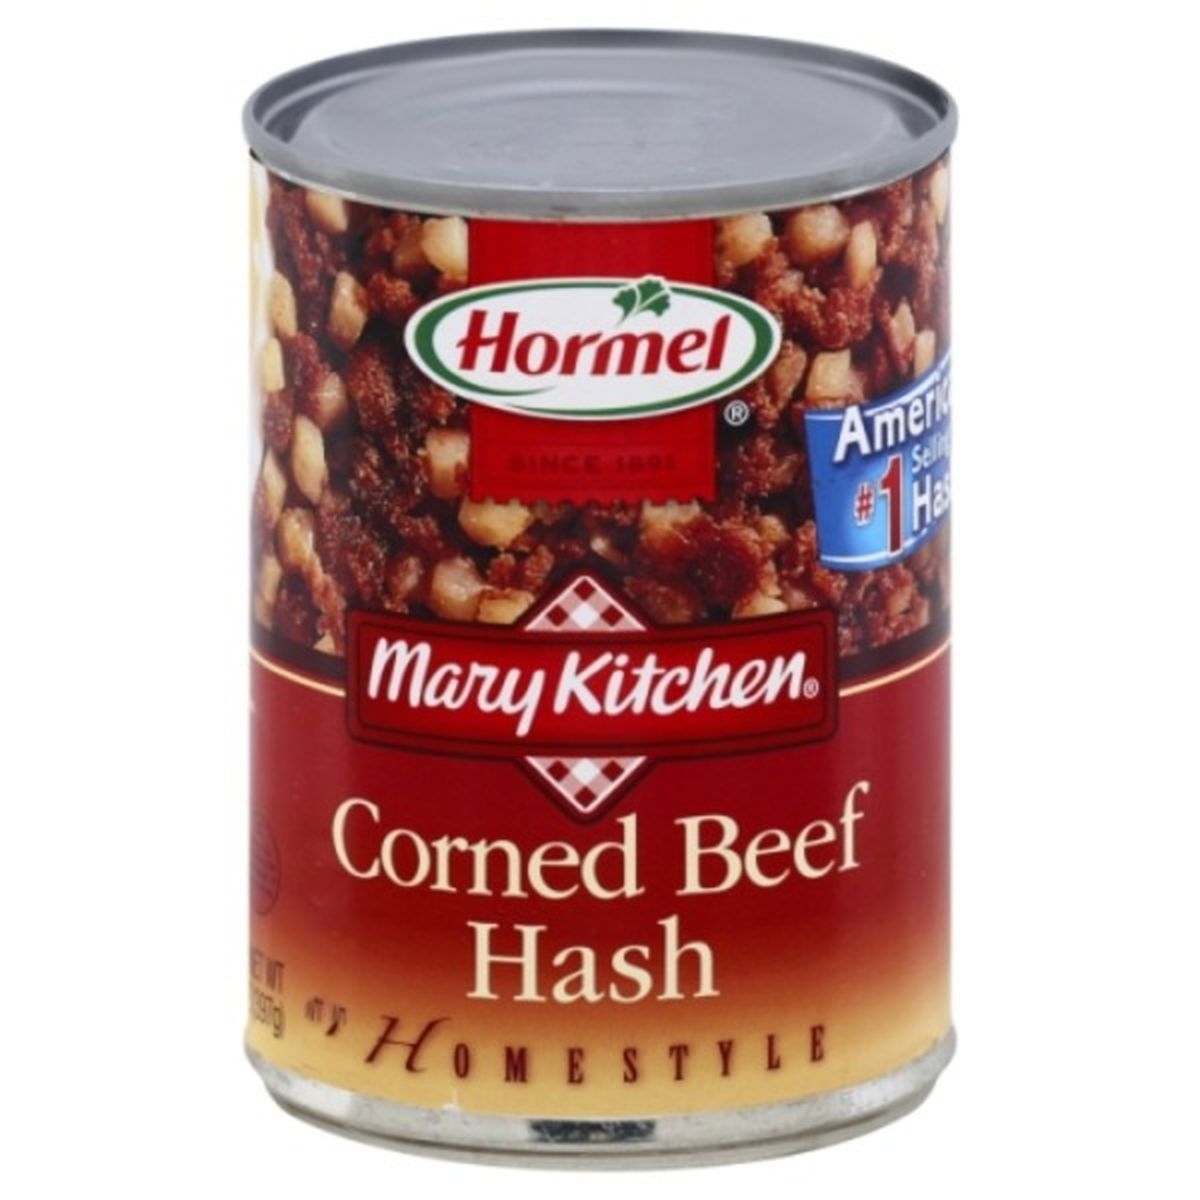 Calories in Hormel Mary Kitchen Corned Beef Hash, Homestyle